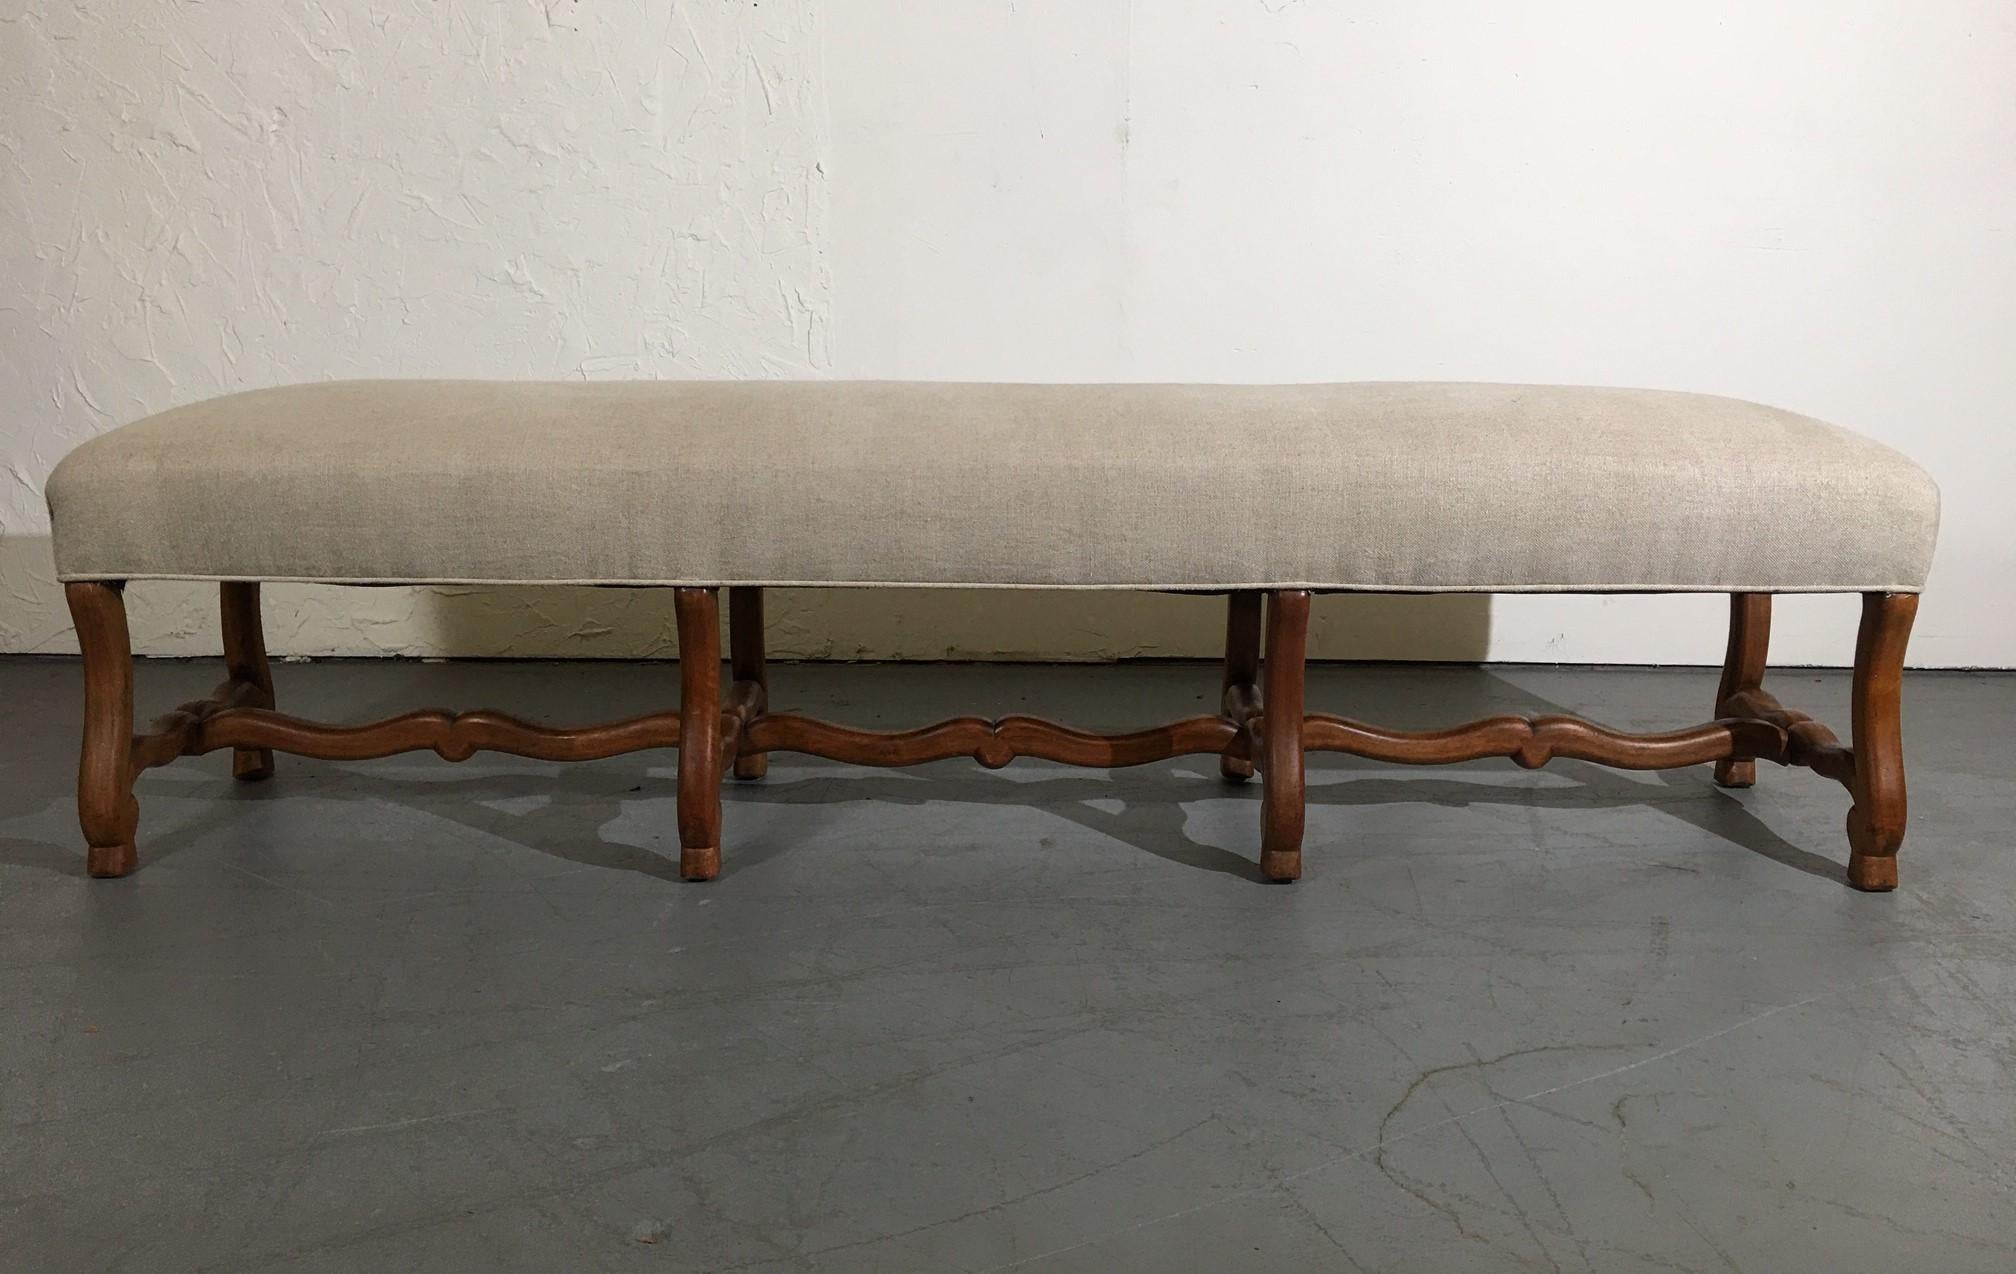 19th-century Louis xiv style walnut extra-long bench. Upholstered in linen.